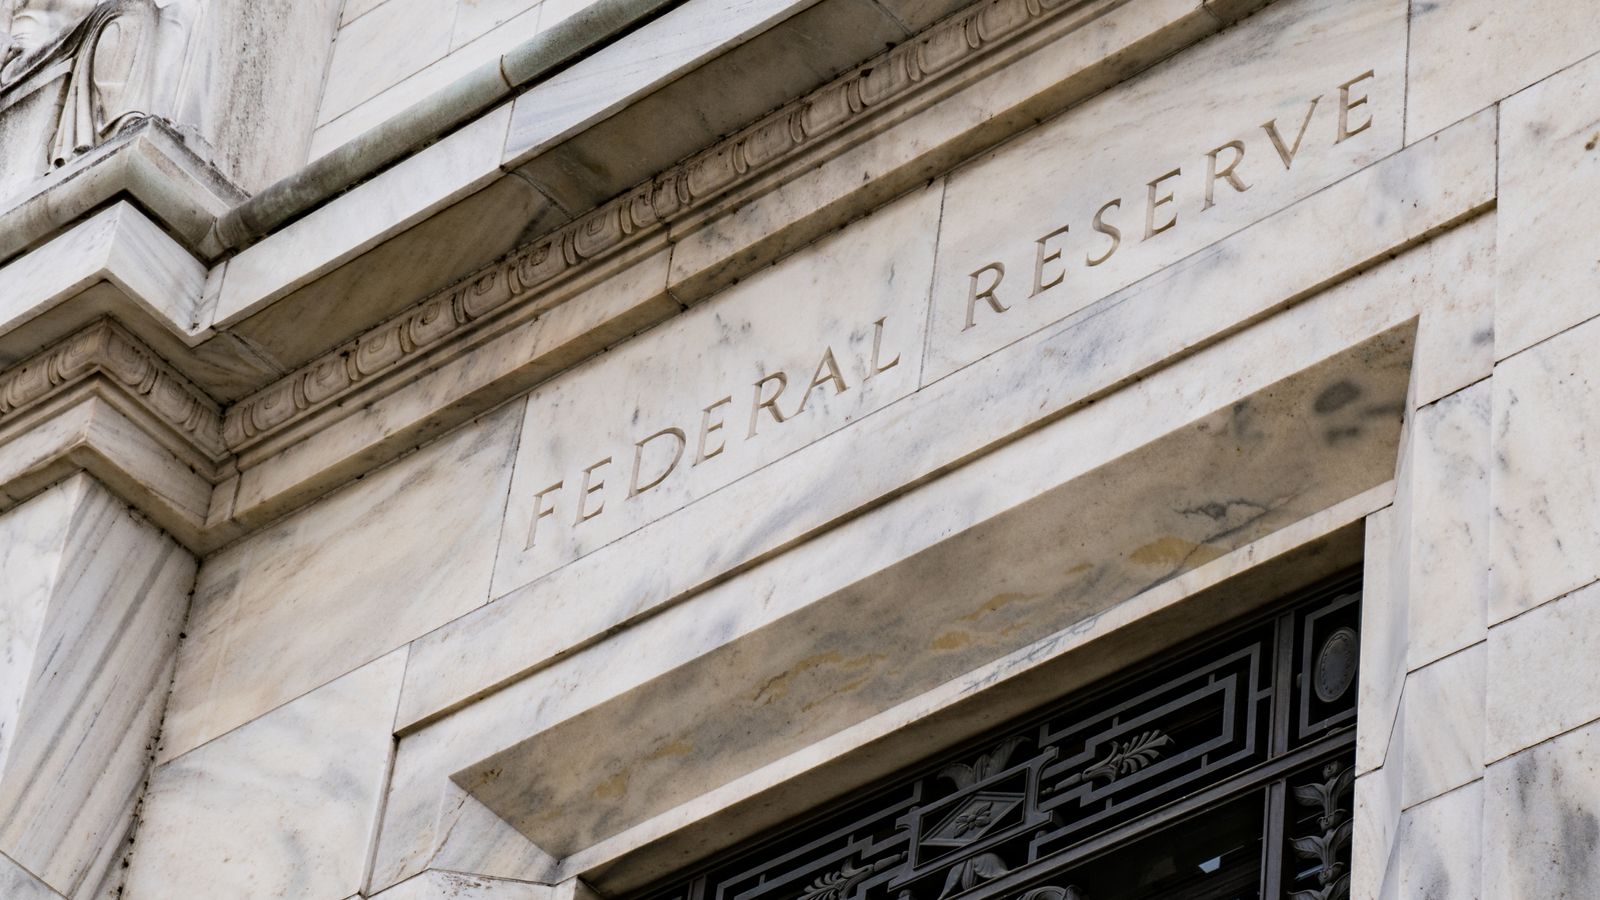 Don't raise interest rates, UN warns the Federal Reserve and other central banks